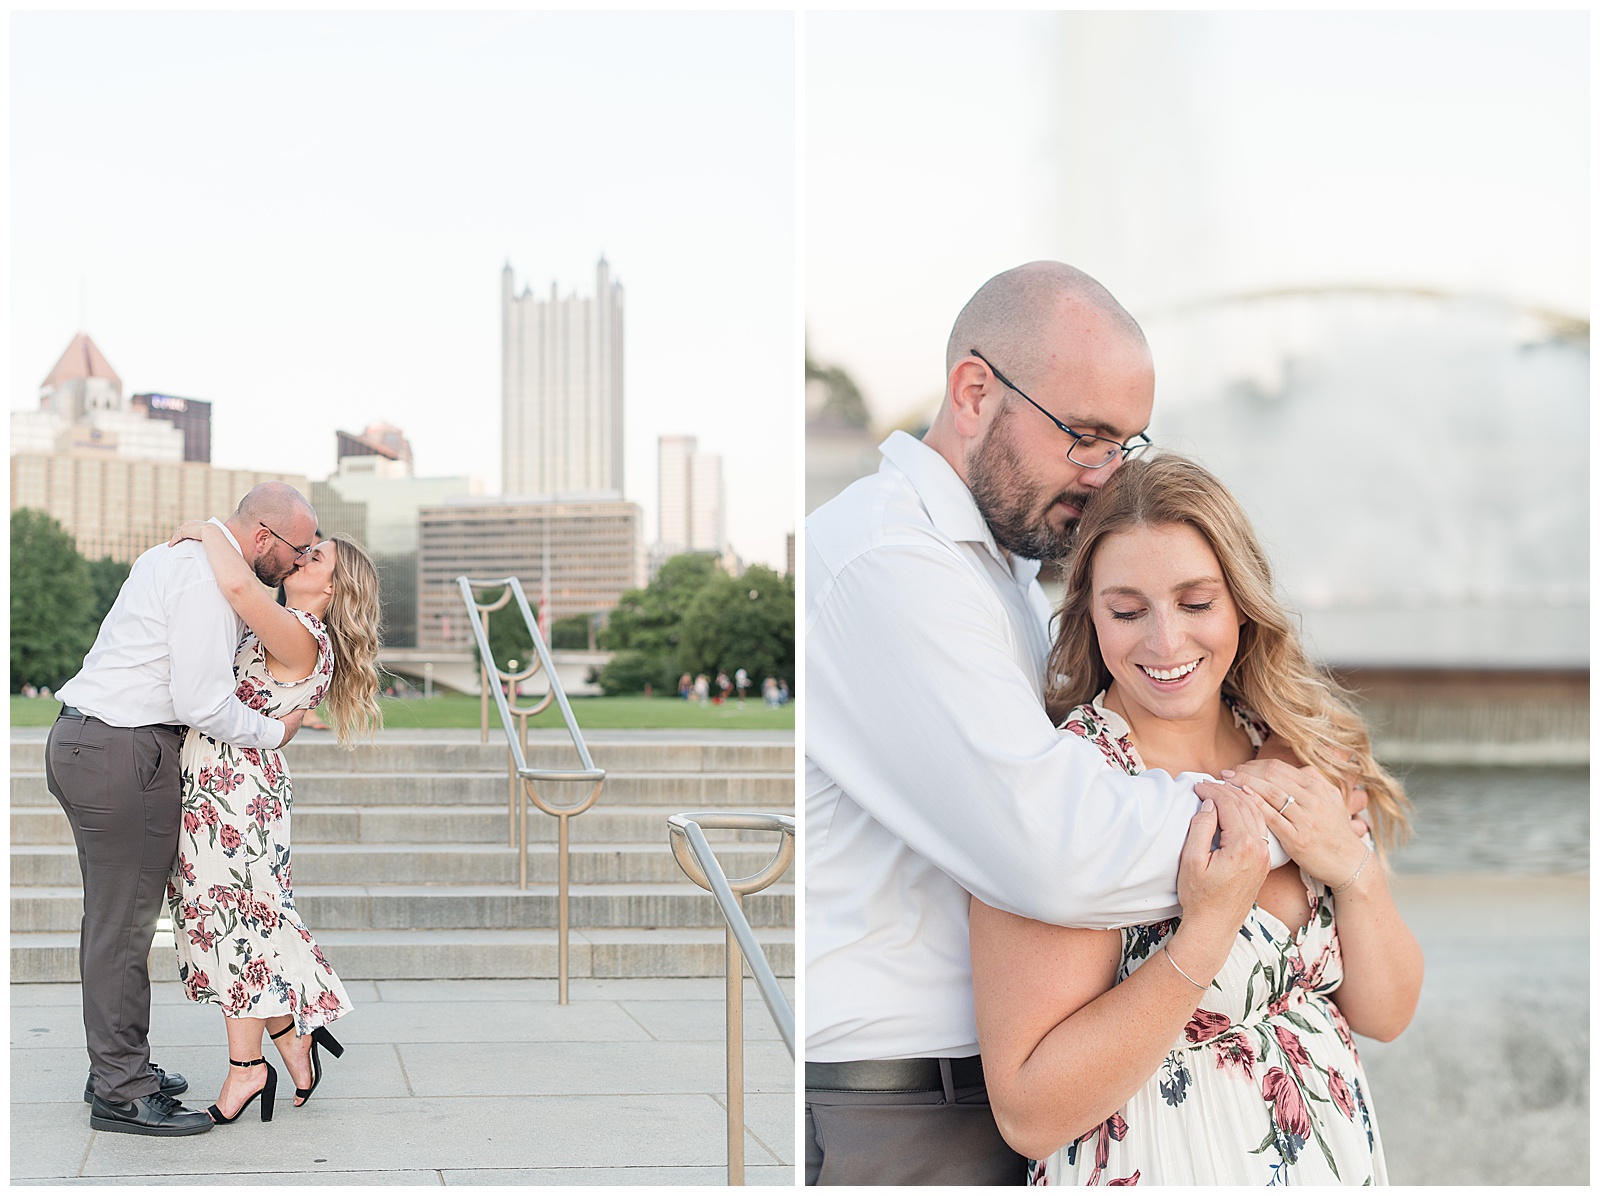 the couple is on the left hand side of the photo facing each other kissing and hugging each other tightly with the guy on the left and the girl on the right leaning back slightly and her right foot propped back with concrete stairs and a handrail and trees and buildings behind them in downtown Pittsburgh, a closeup photo of the couple outdoors with the guy on the left behind the girl hugging her tightly and resting his face on her head as they both smile and the girl is holding her hands up to his hands around her as she looks down towards the ground in downtown Pittsburgh